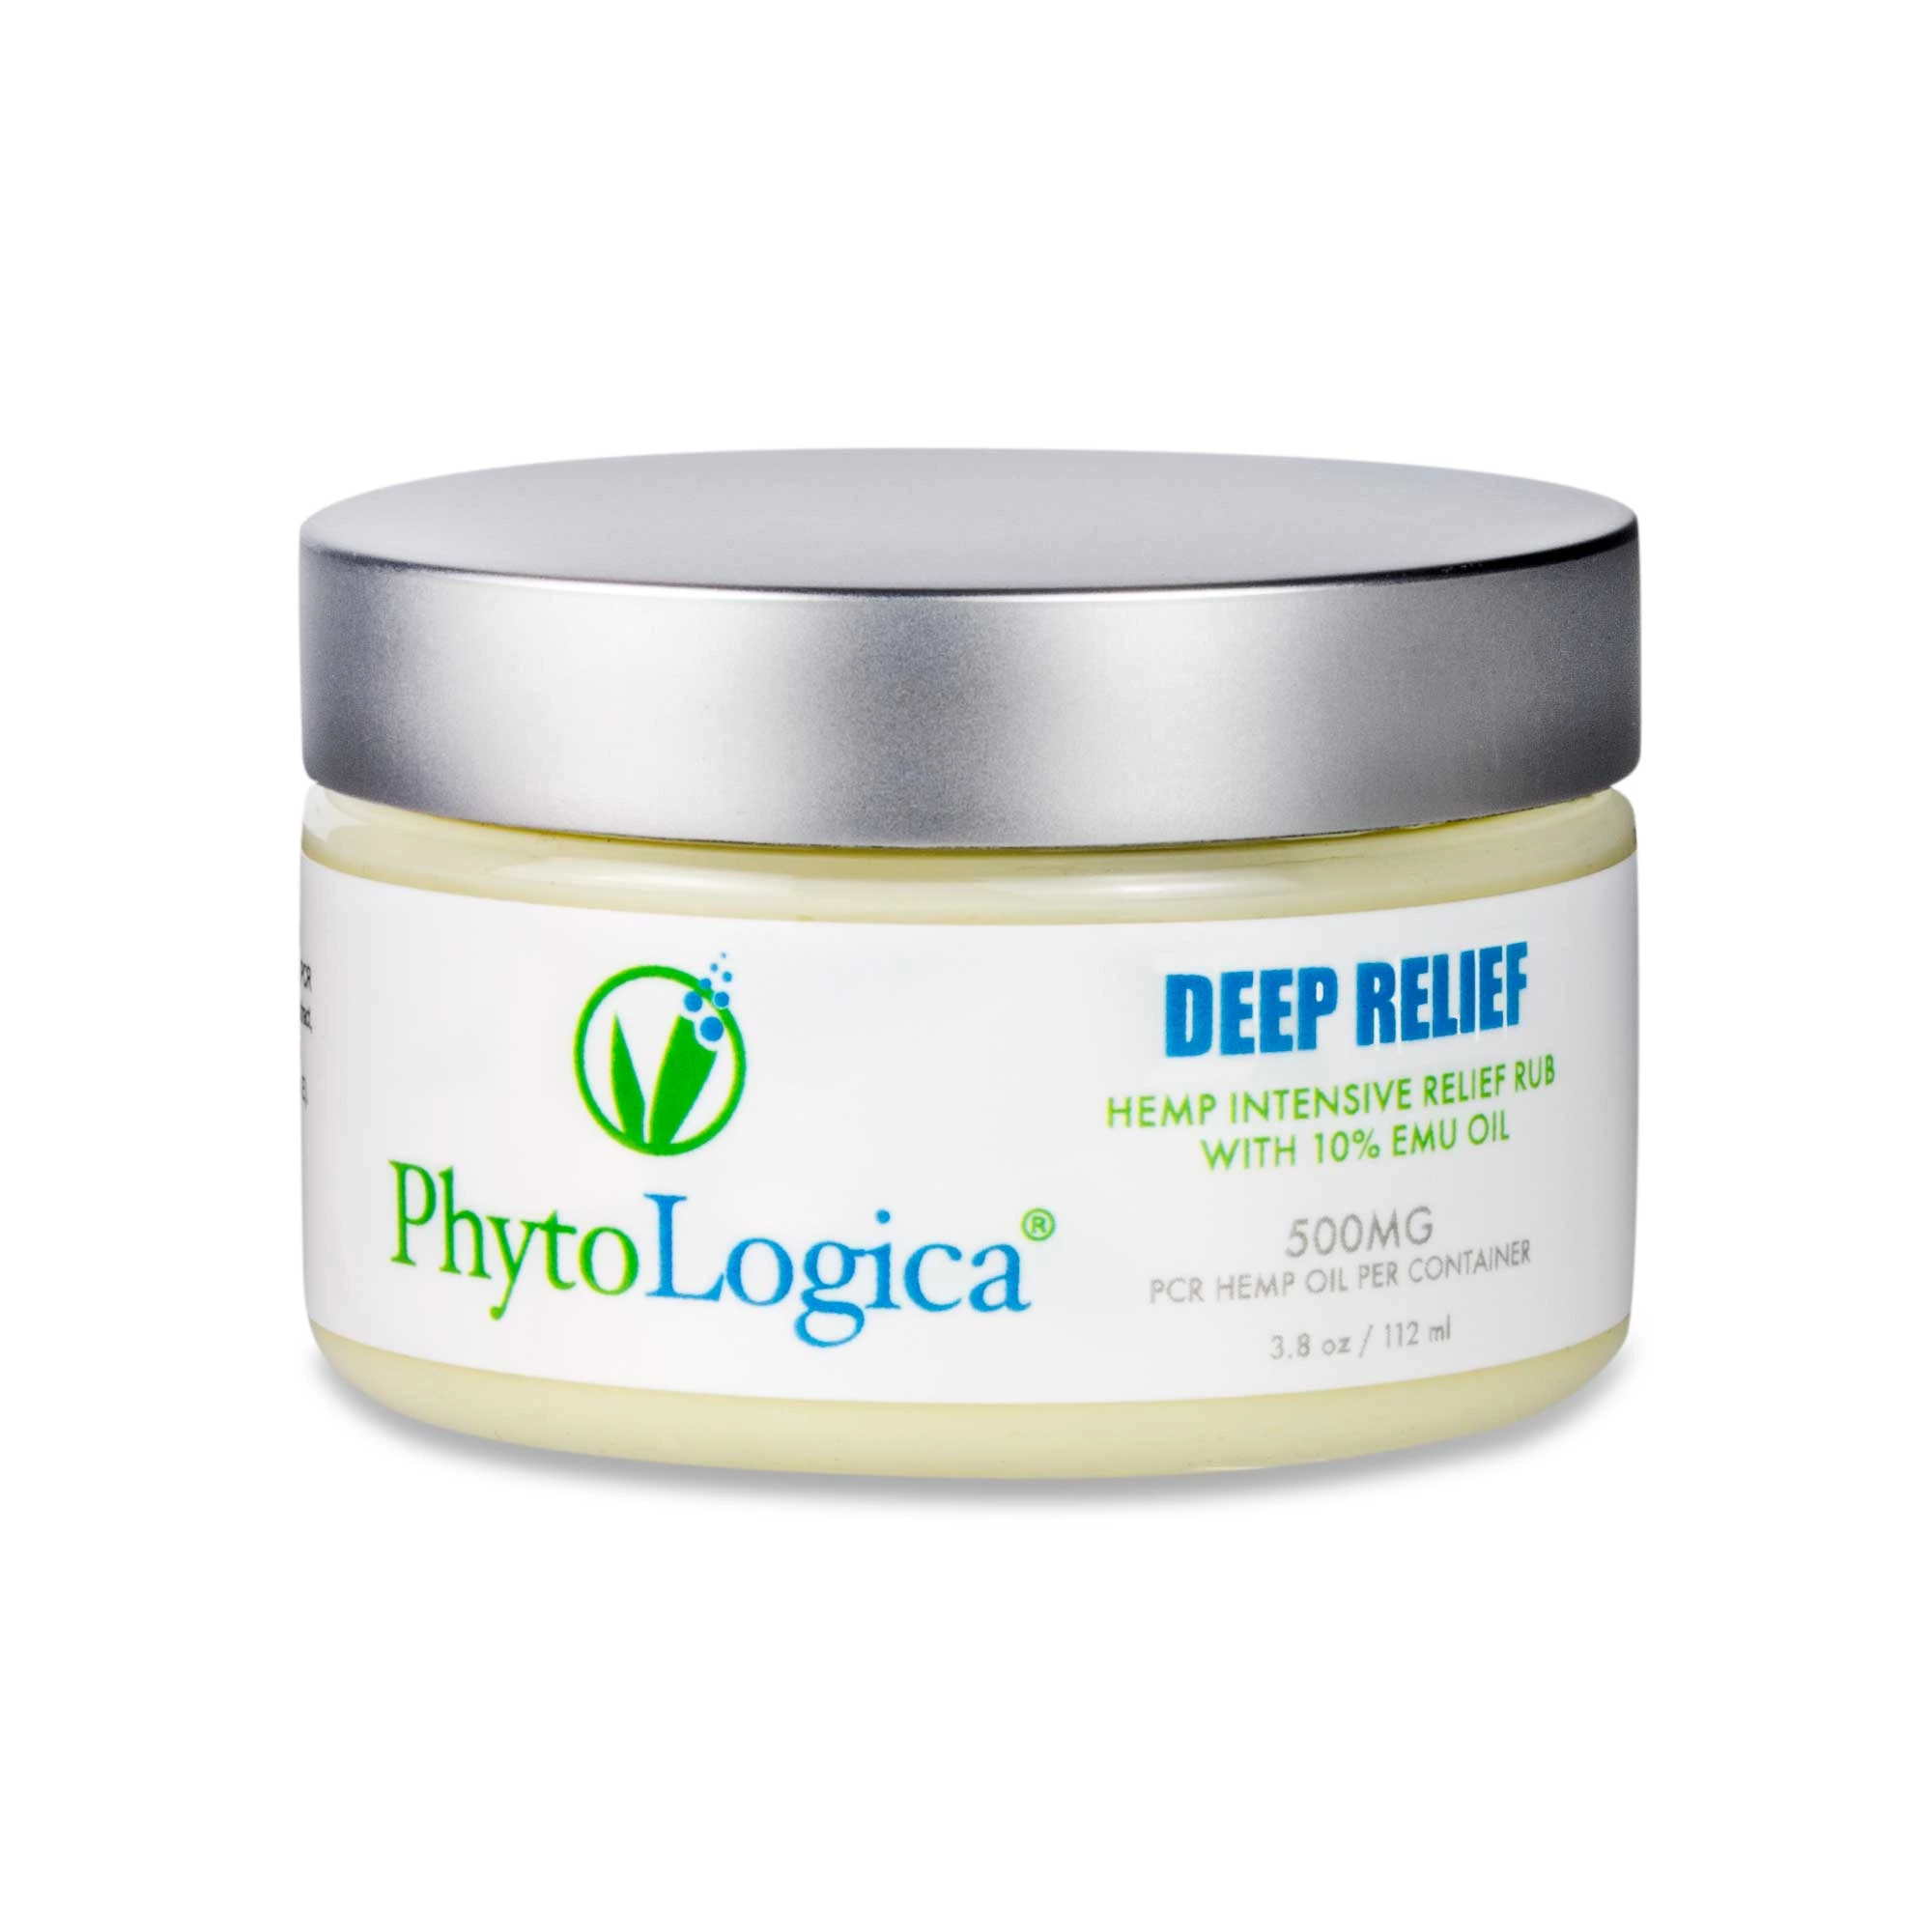 Phytologica Hemp Intensive Relief Rub with EMU Oil 500mg Bottle